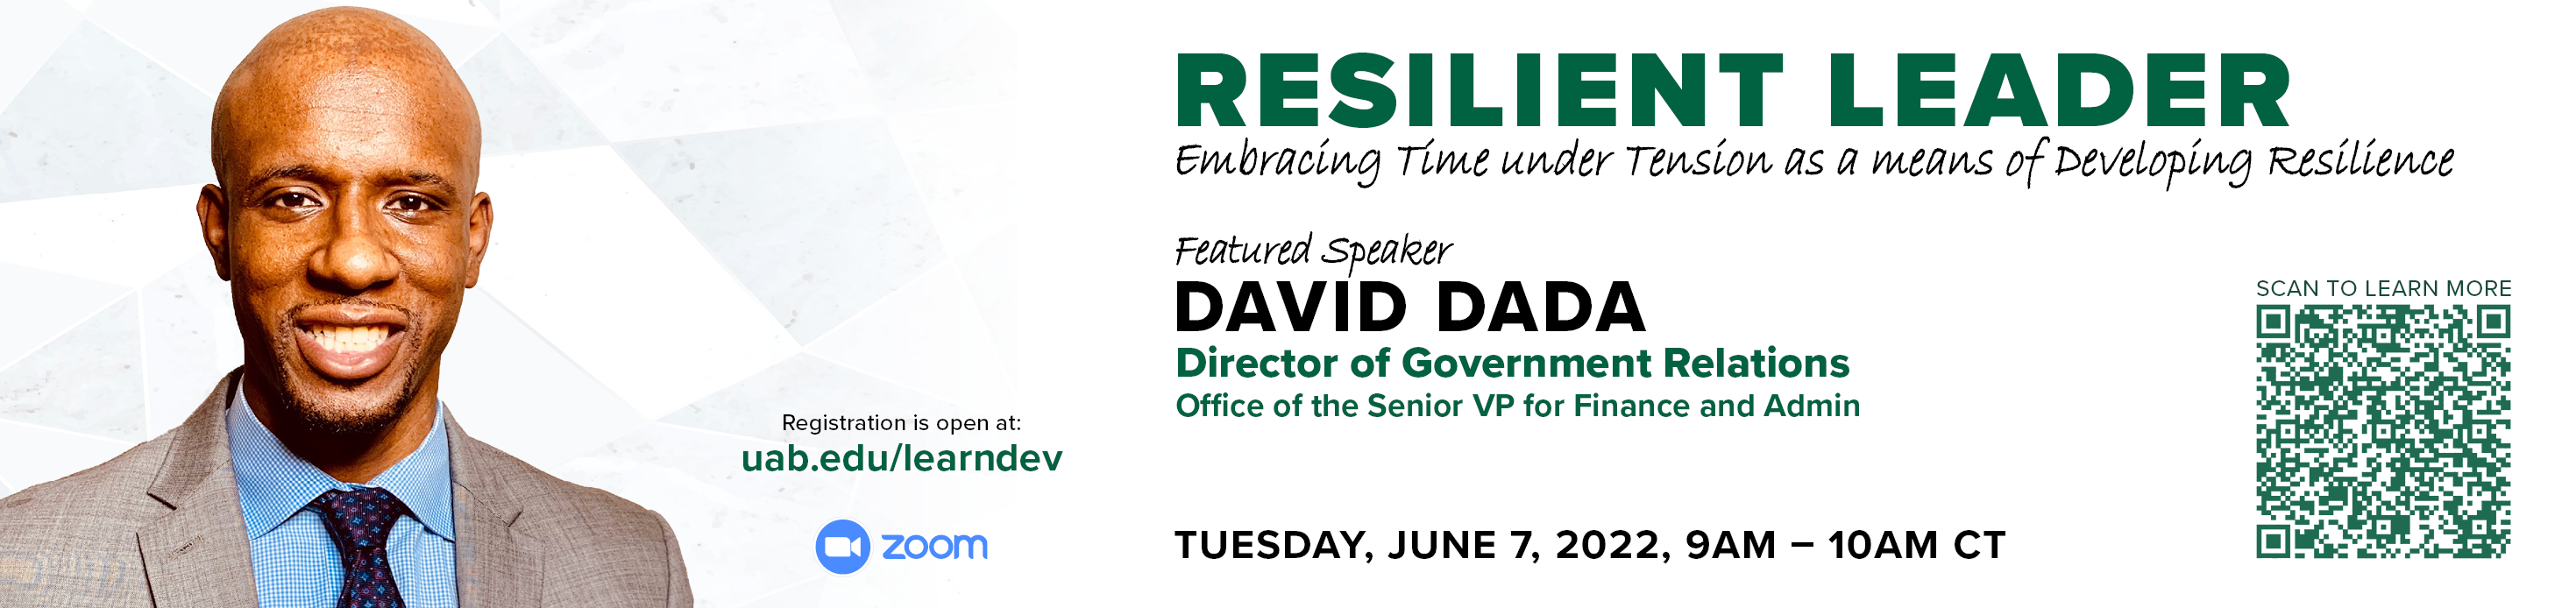 Resilient Leader with David Dada